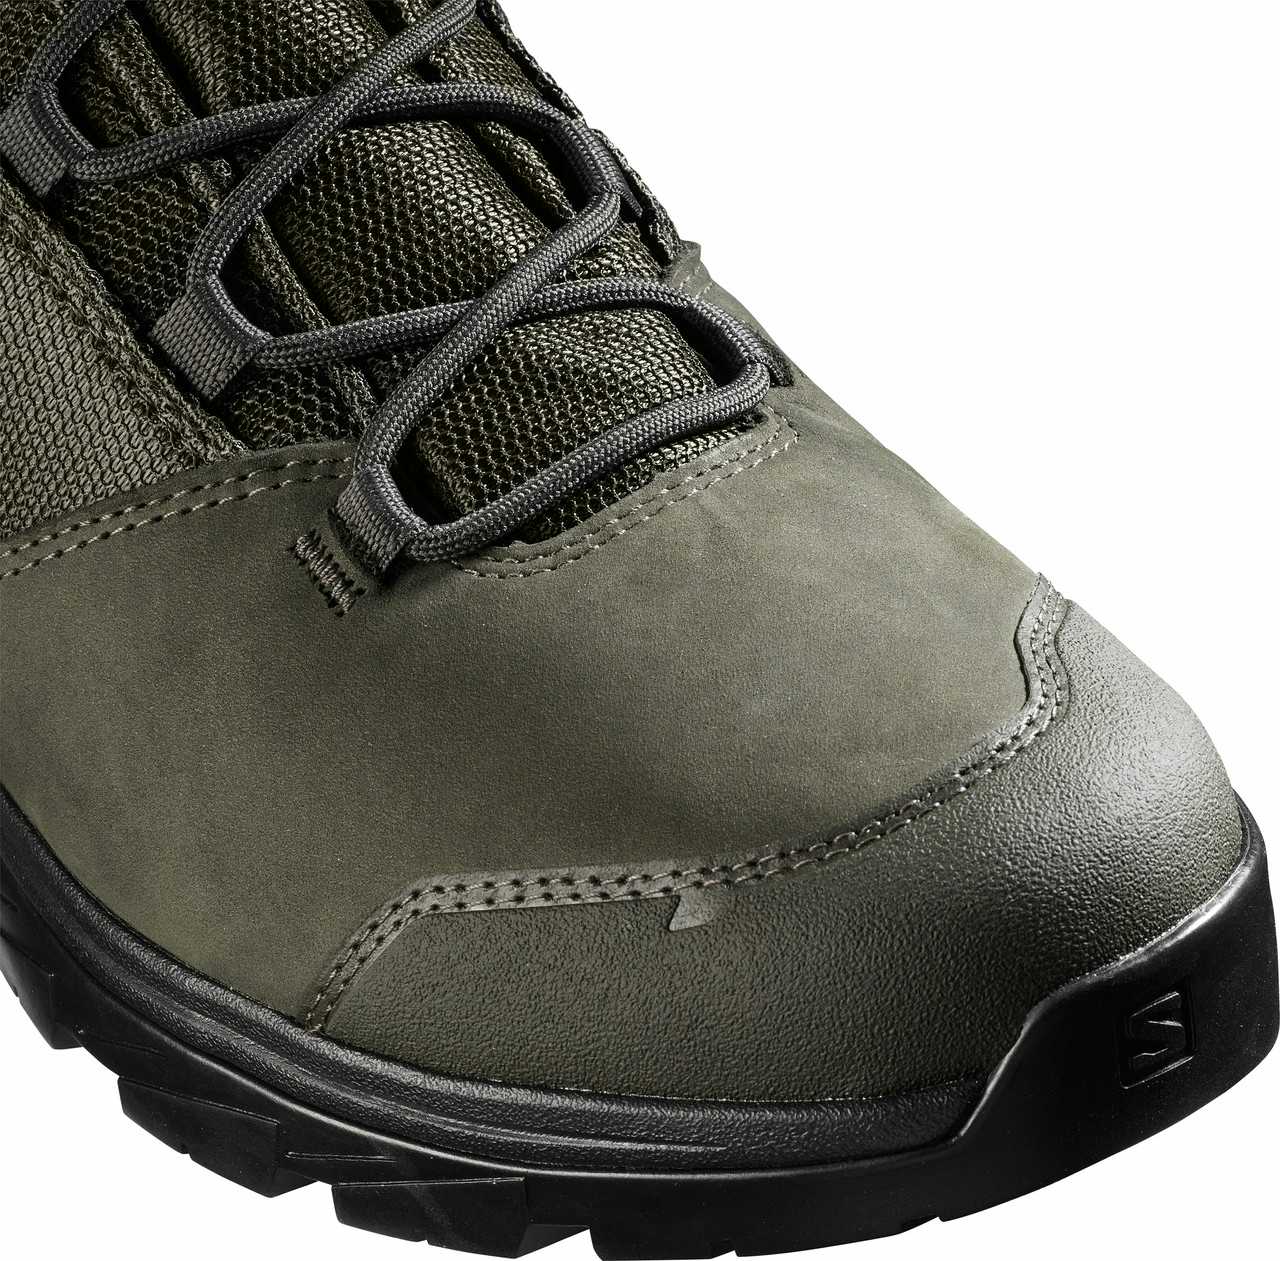 OUTward Gore-Tex Hiking Boots Peat/Black/Burnt Olive